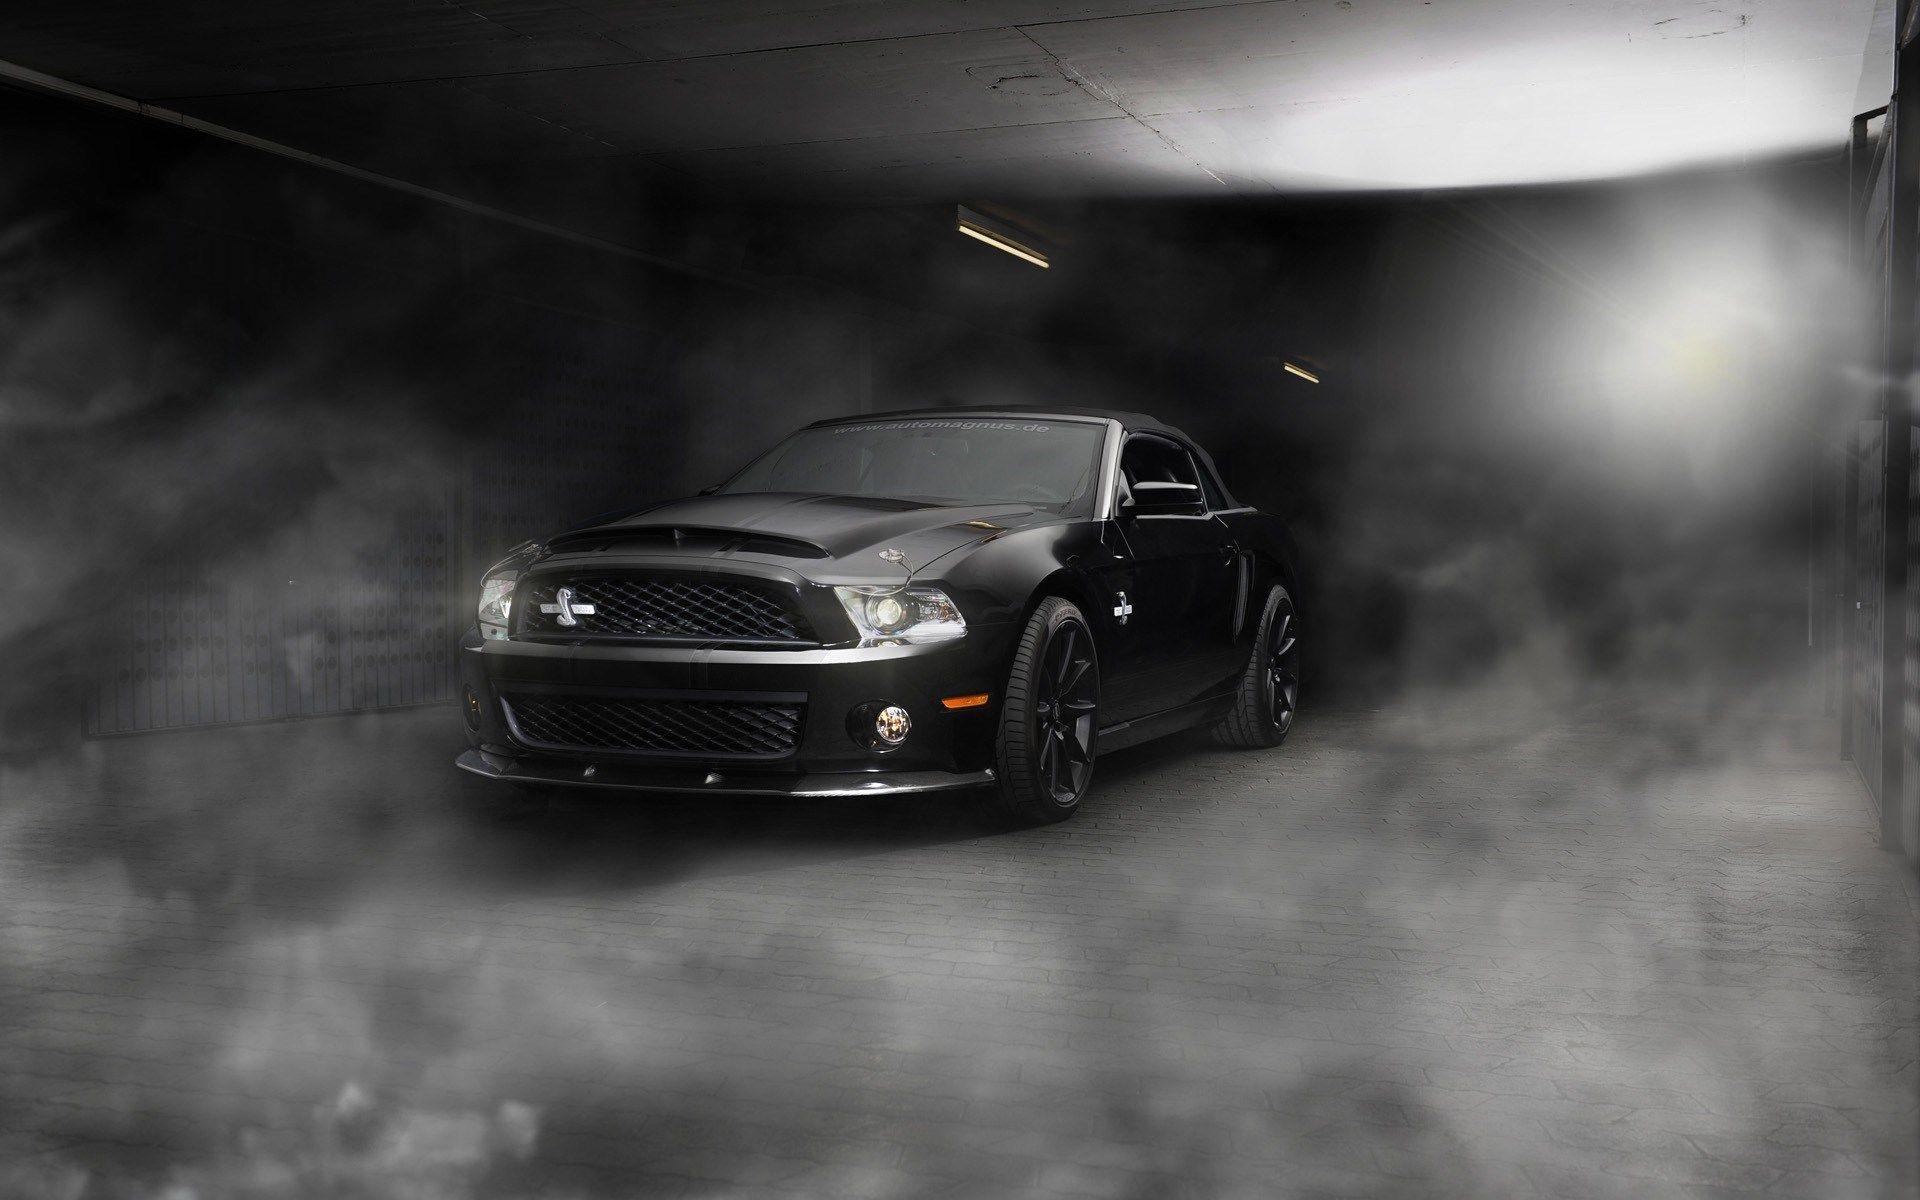 Ford Mustang Shelby GT500 Super Snake Wallpaper, ford mustang